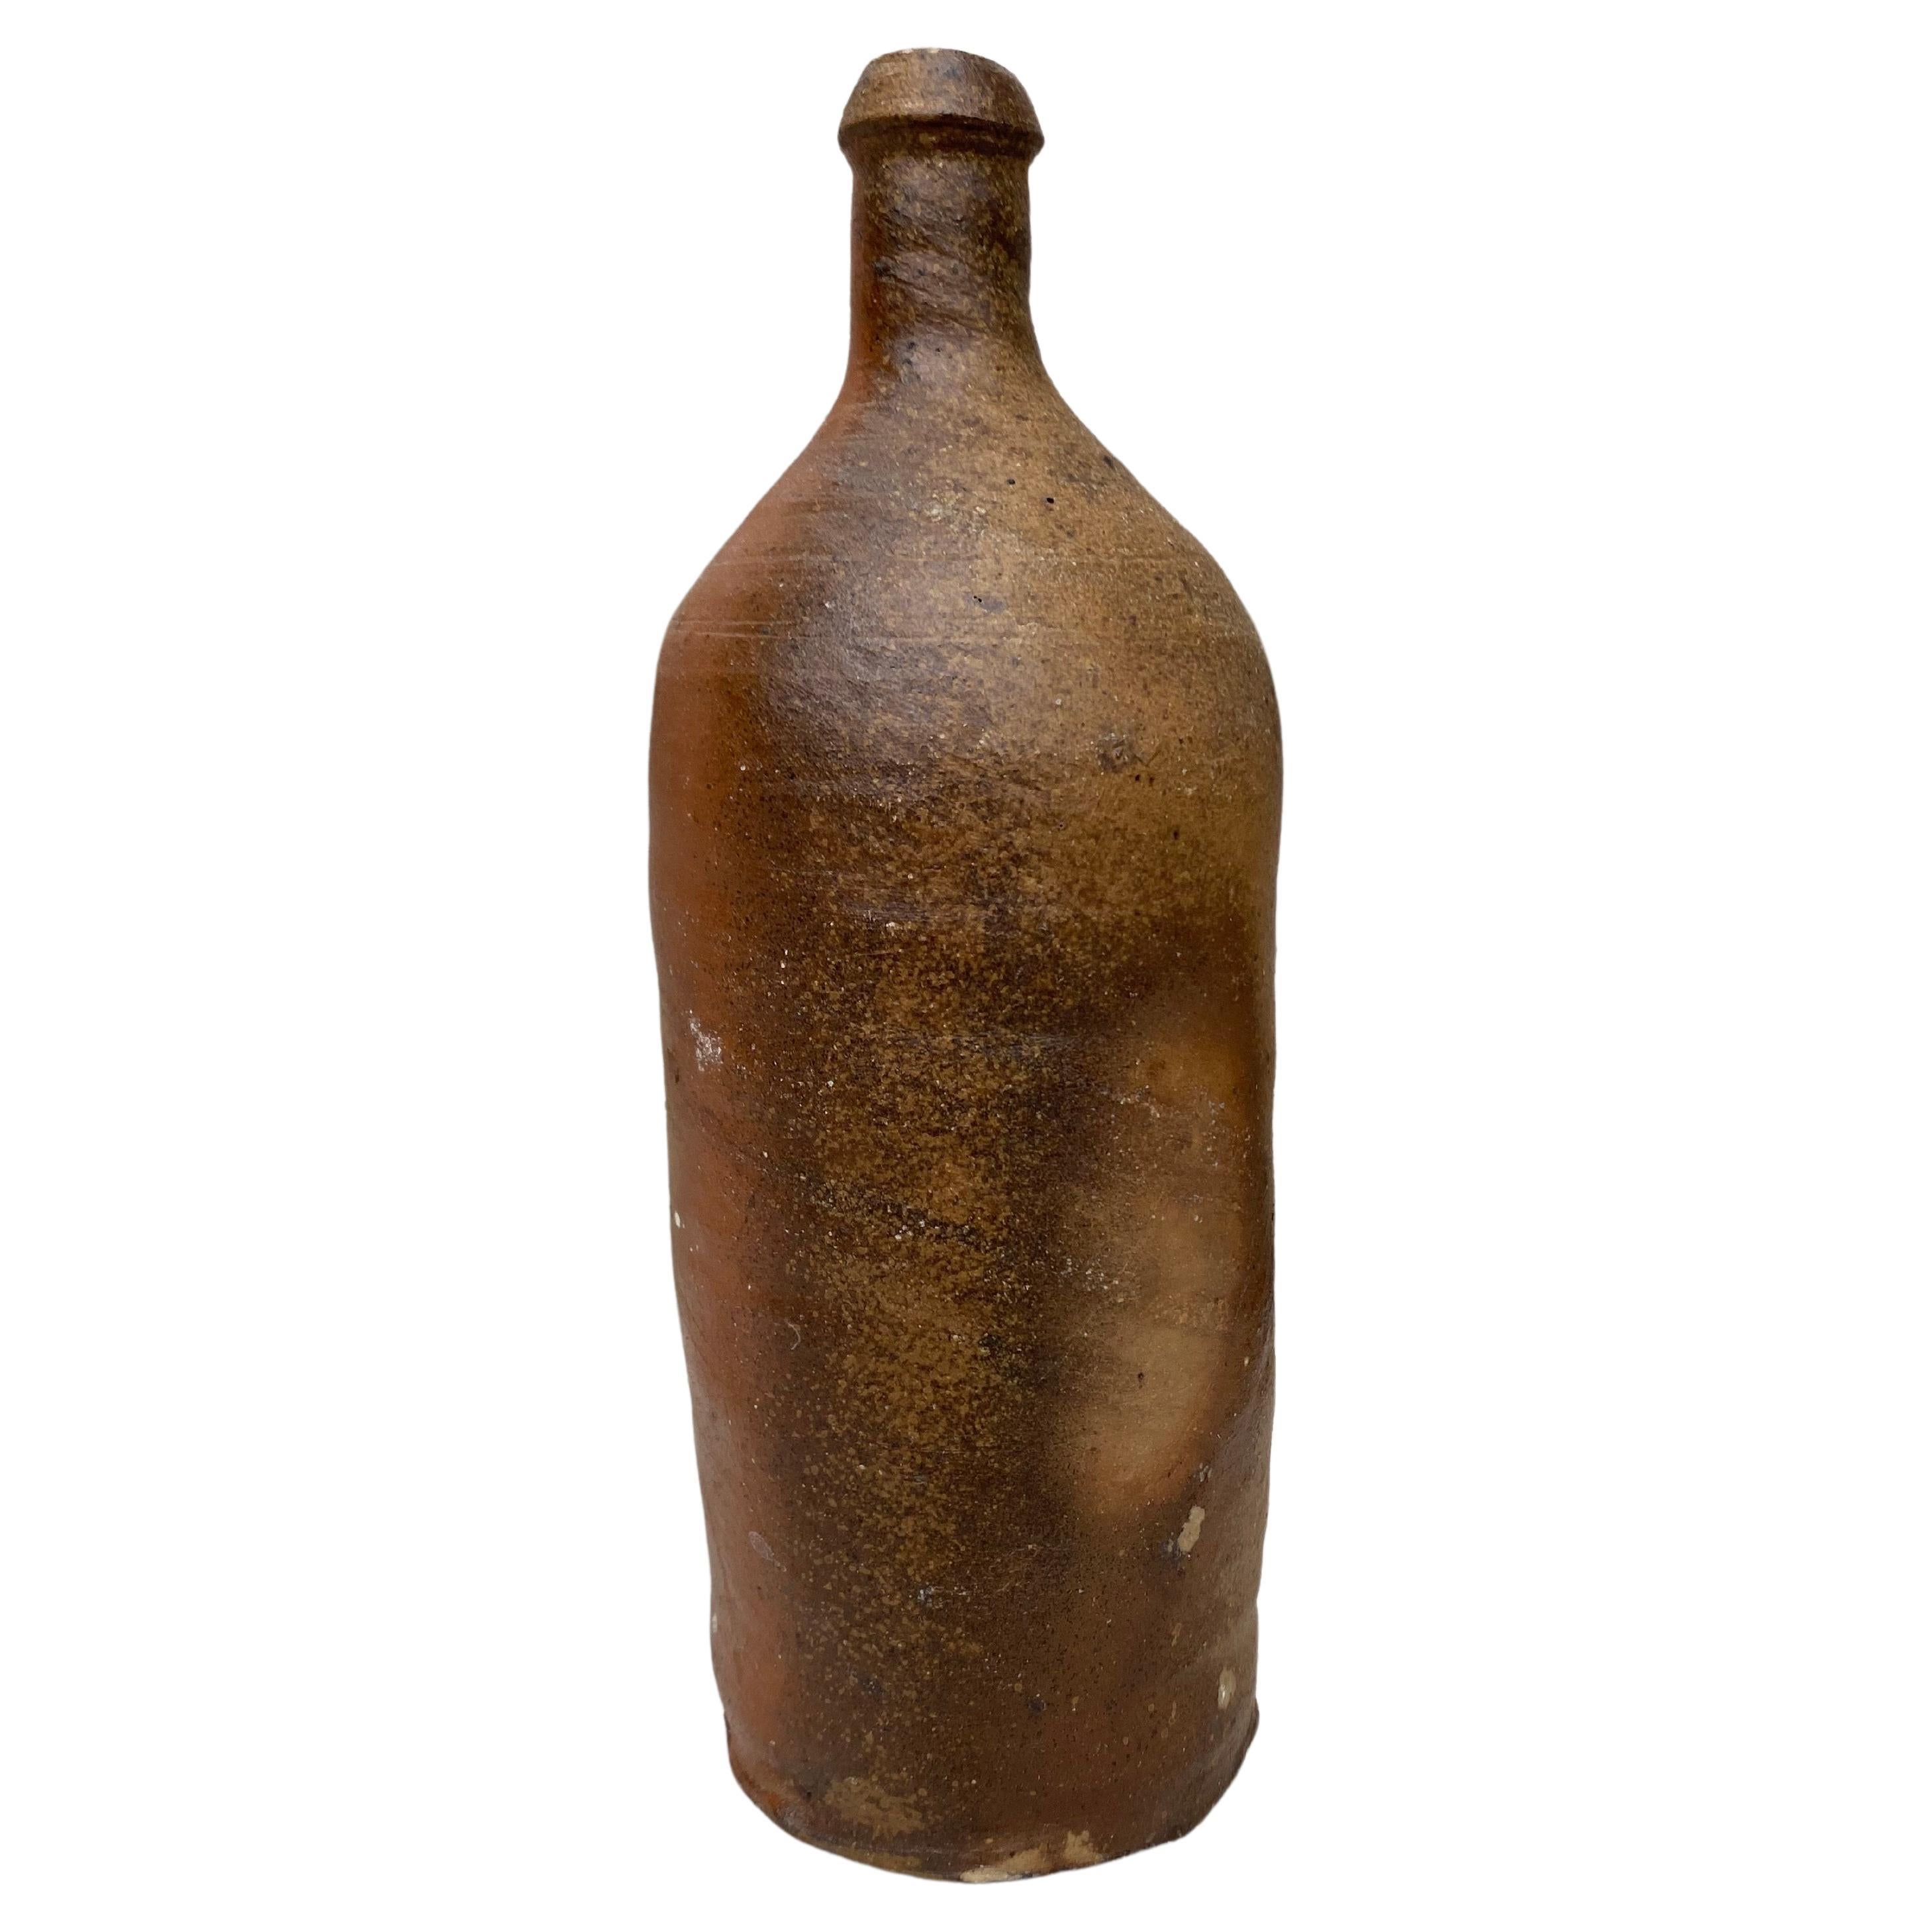 19th Century, French, Pottery Cider Bottle from Normandy